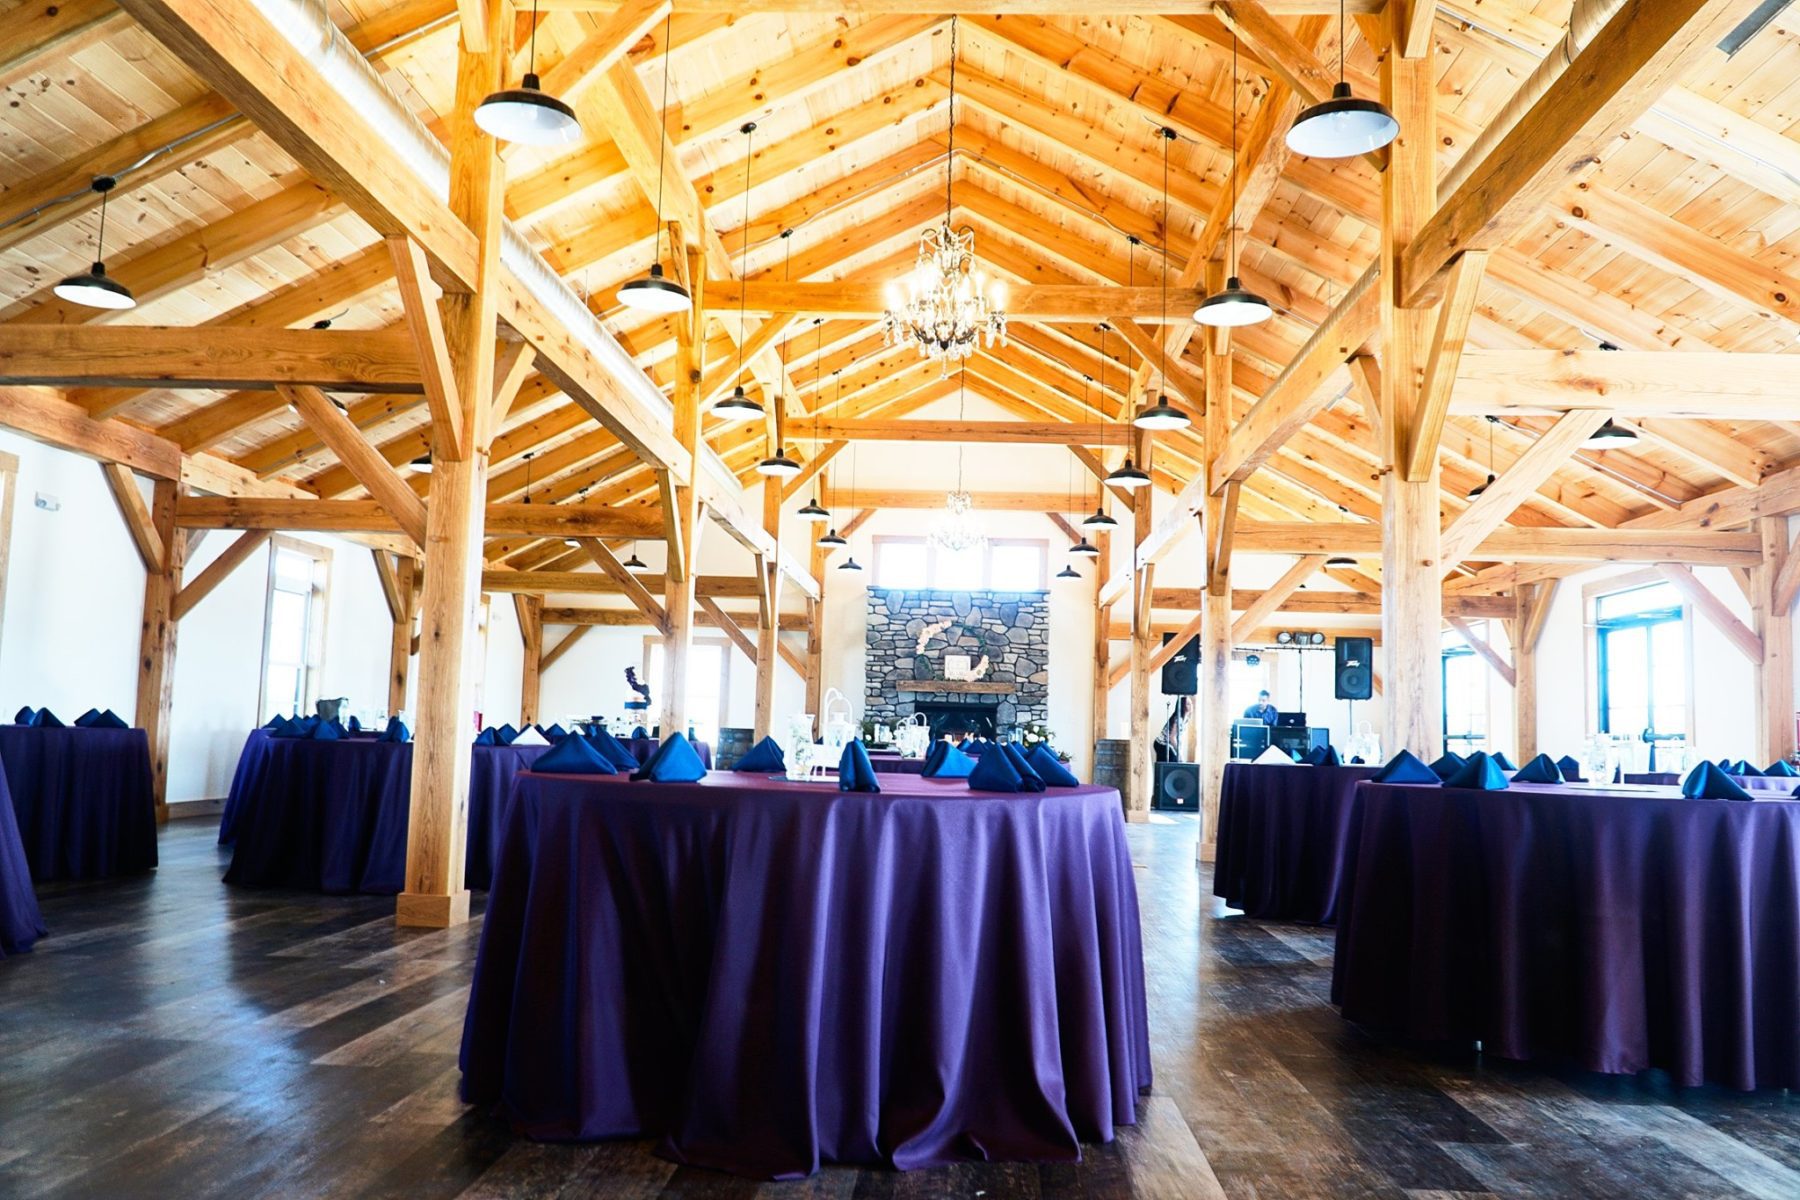 Decorated tables with purple coverings - Fox Meadow Barn Blue Ridge Timberwrights Event Venues Gallery